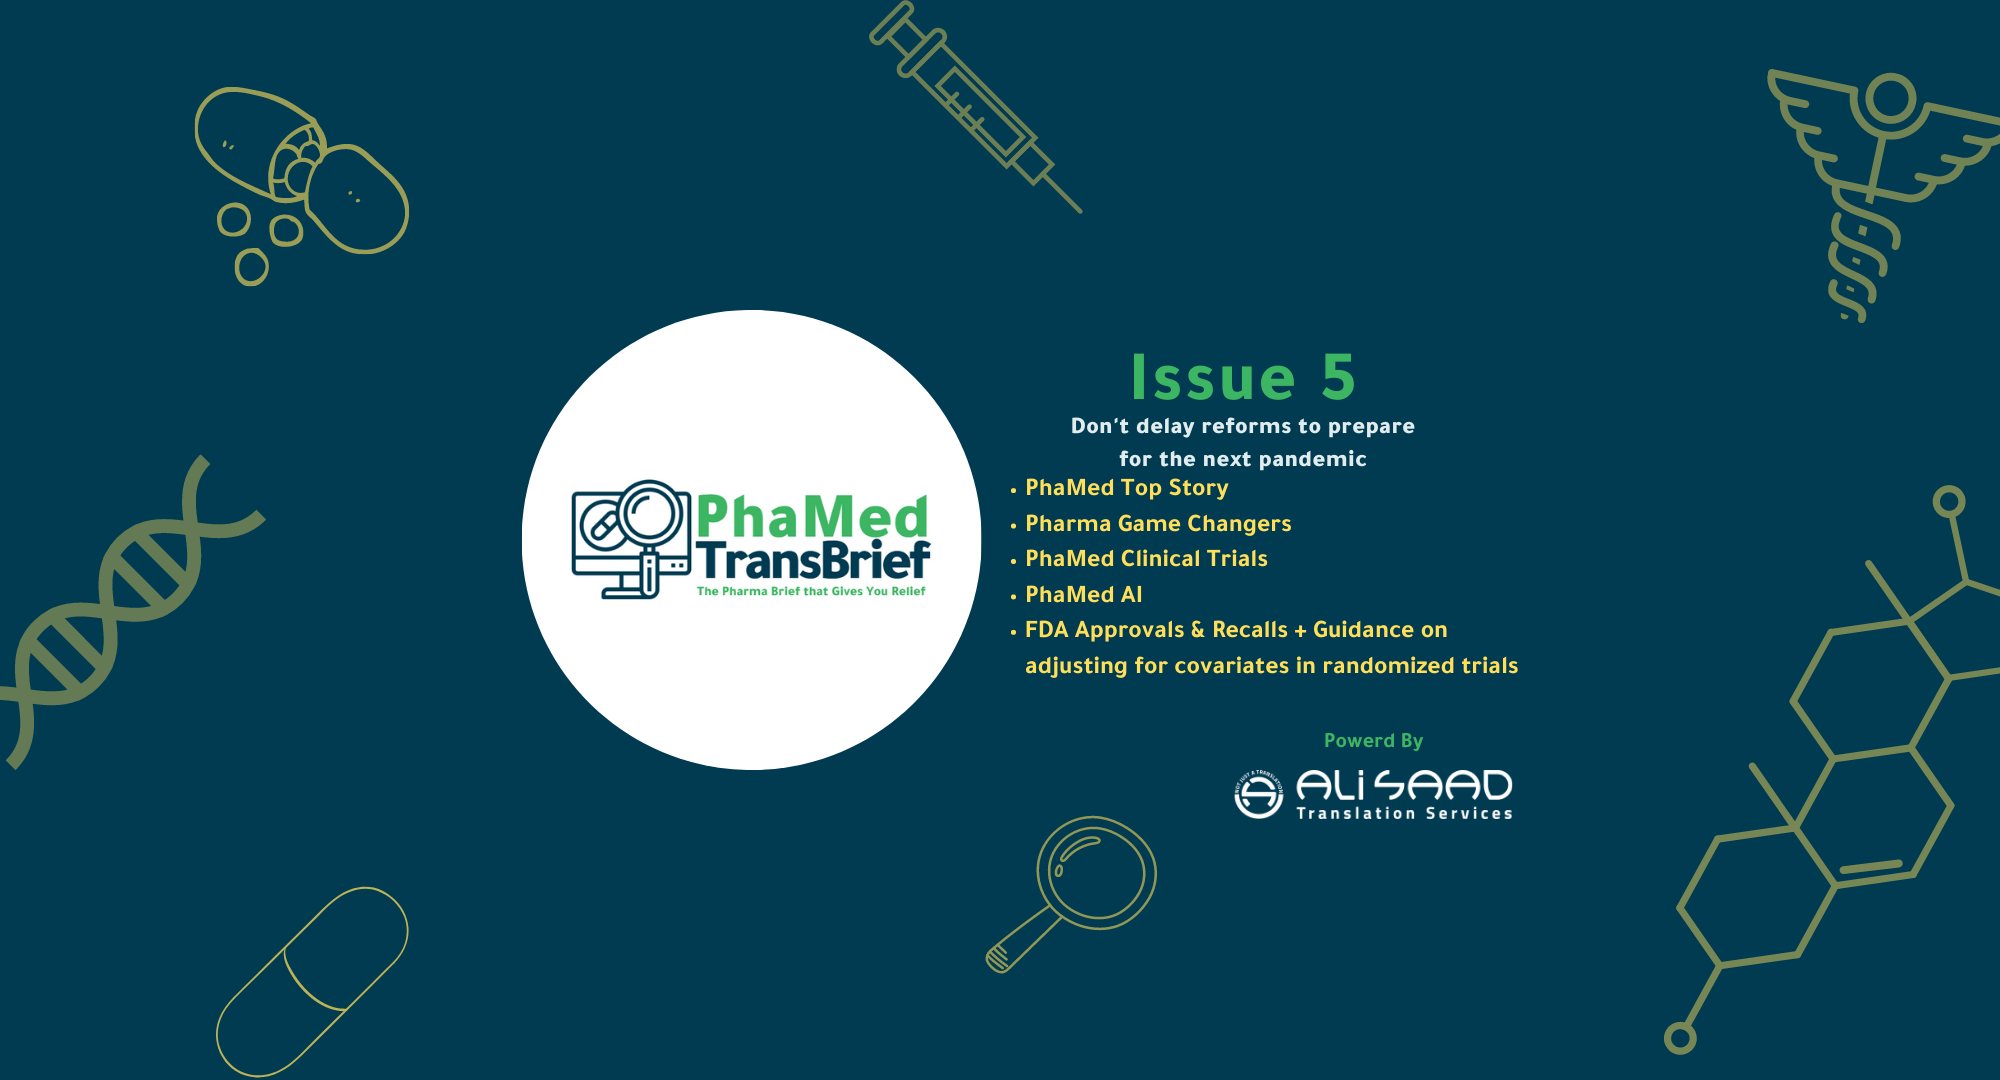 This the feature image of the PhaMed TransBrief's Issue 5 made by Ali Saad Arabic Translation Services.